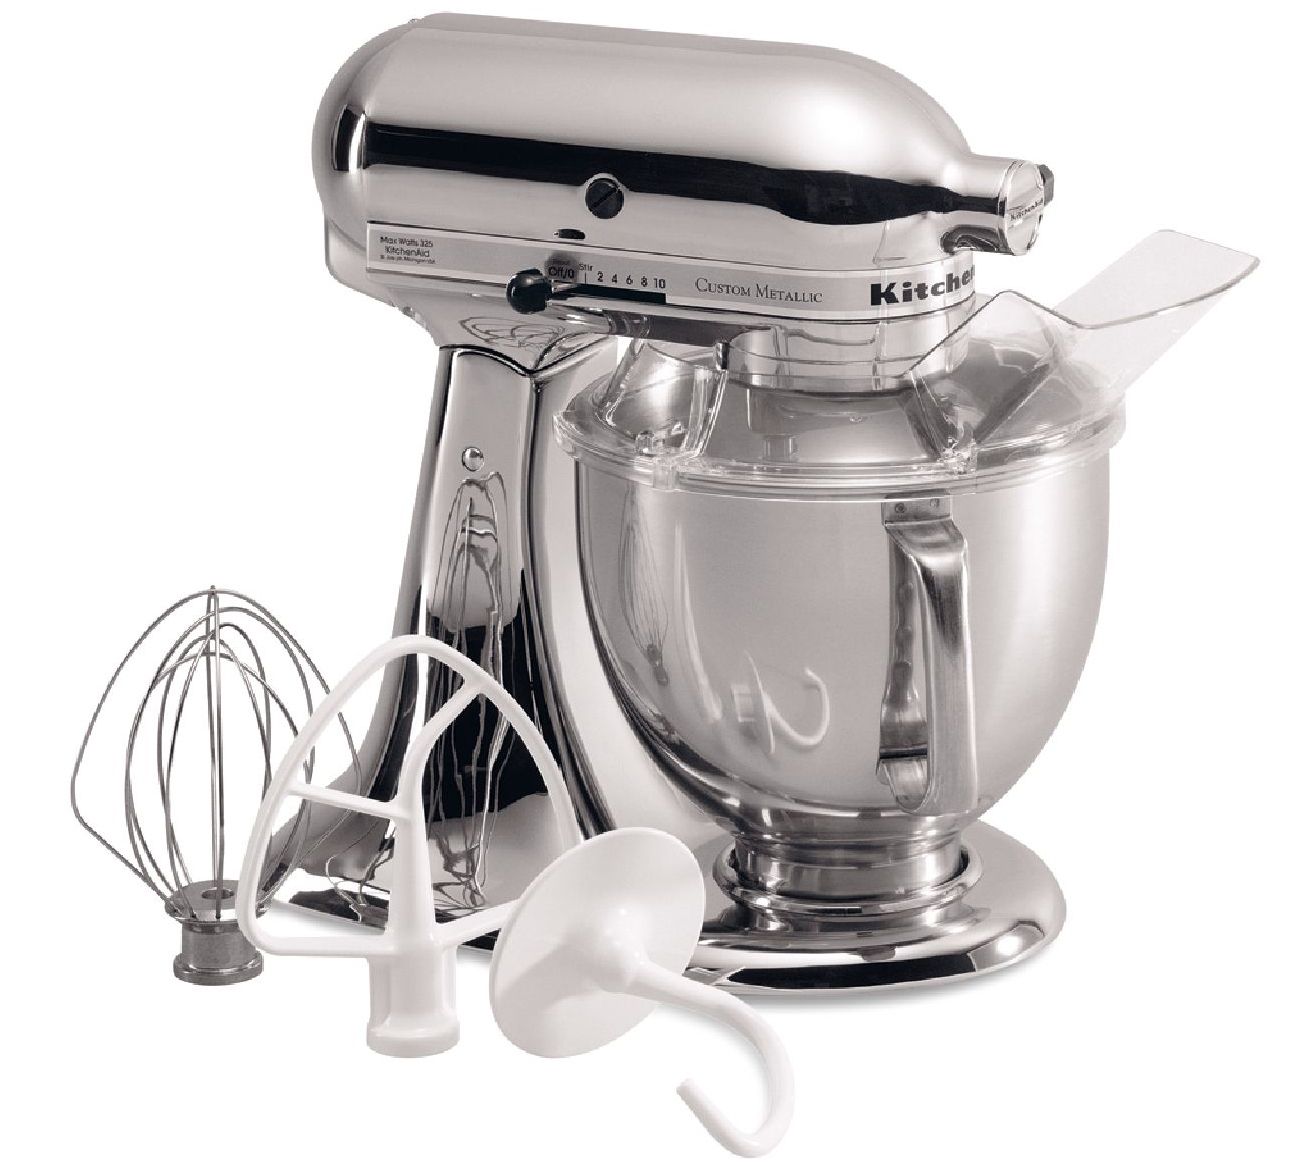 The KitchenAid 5-qt Artisan Stand Mixer is on sale at QVC